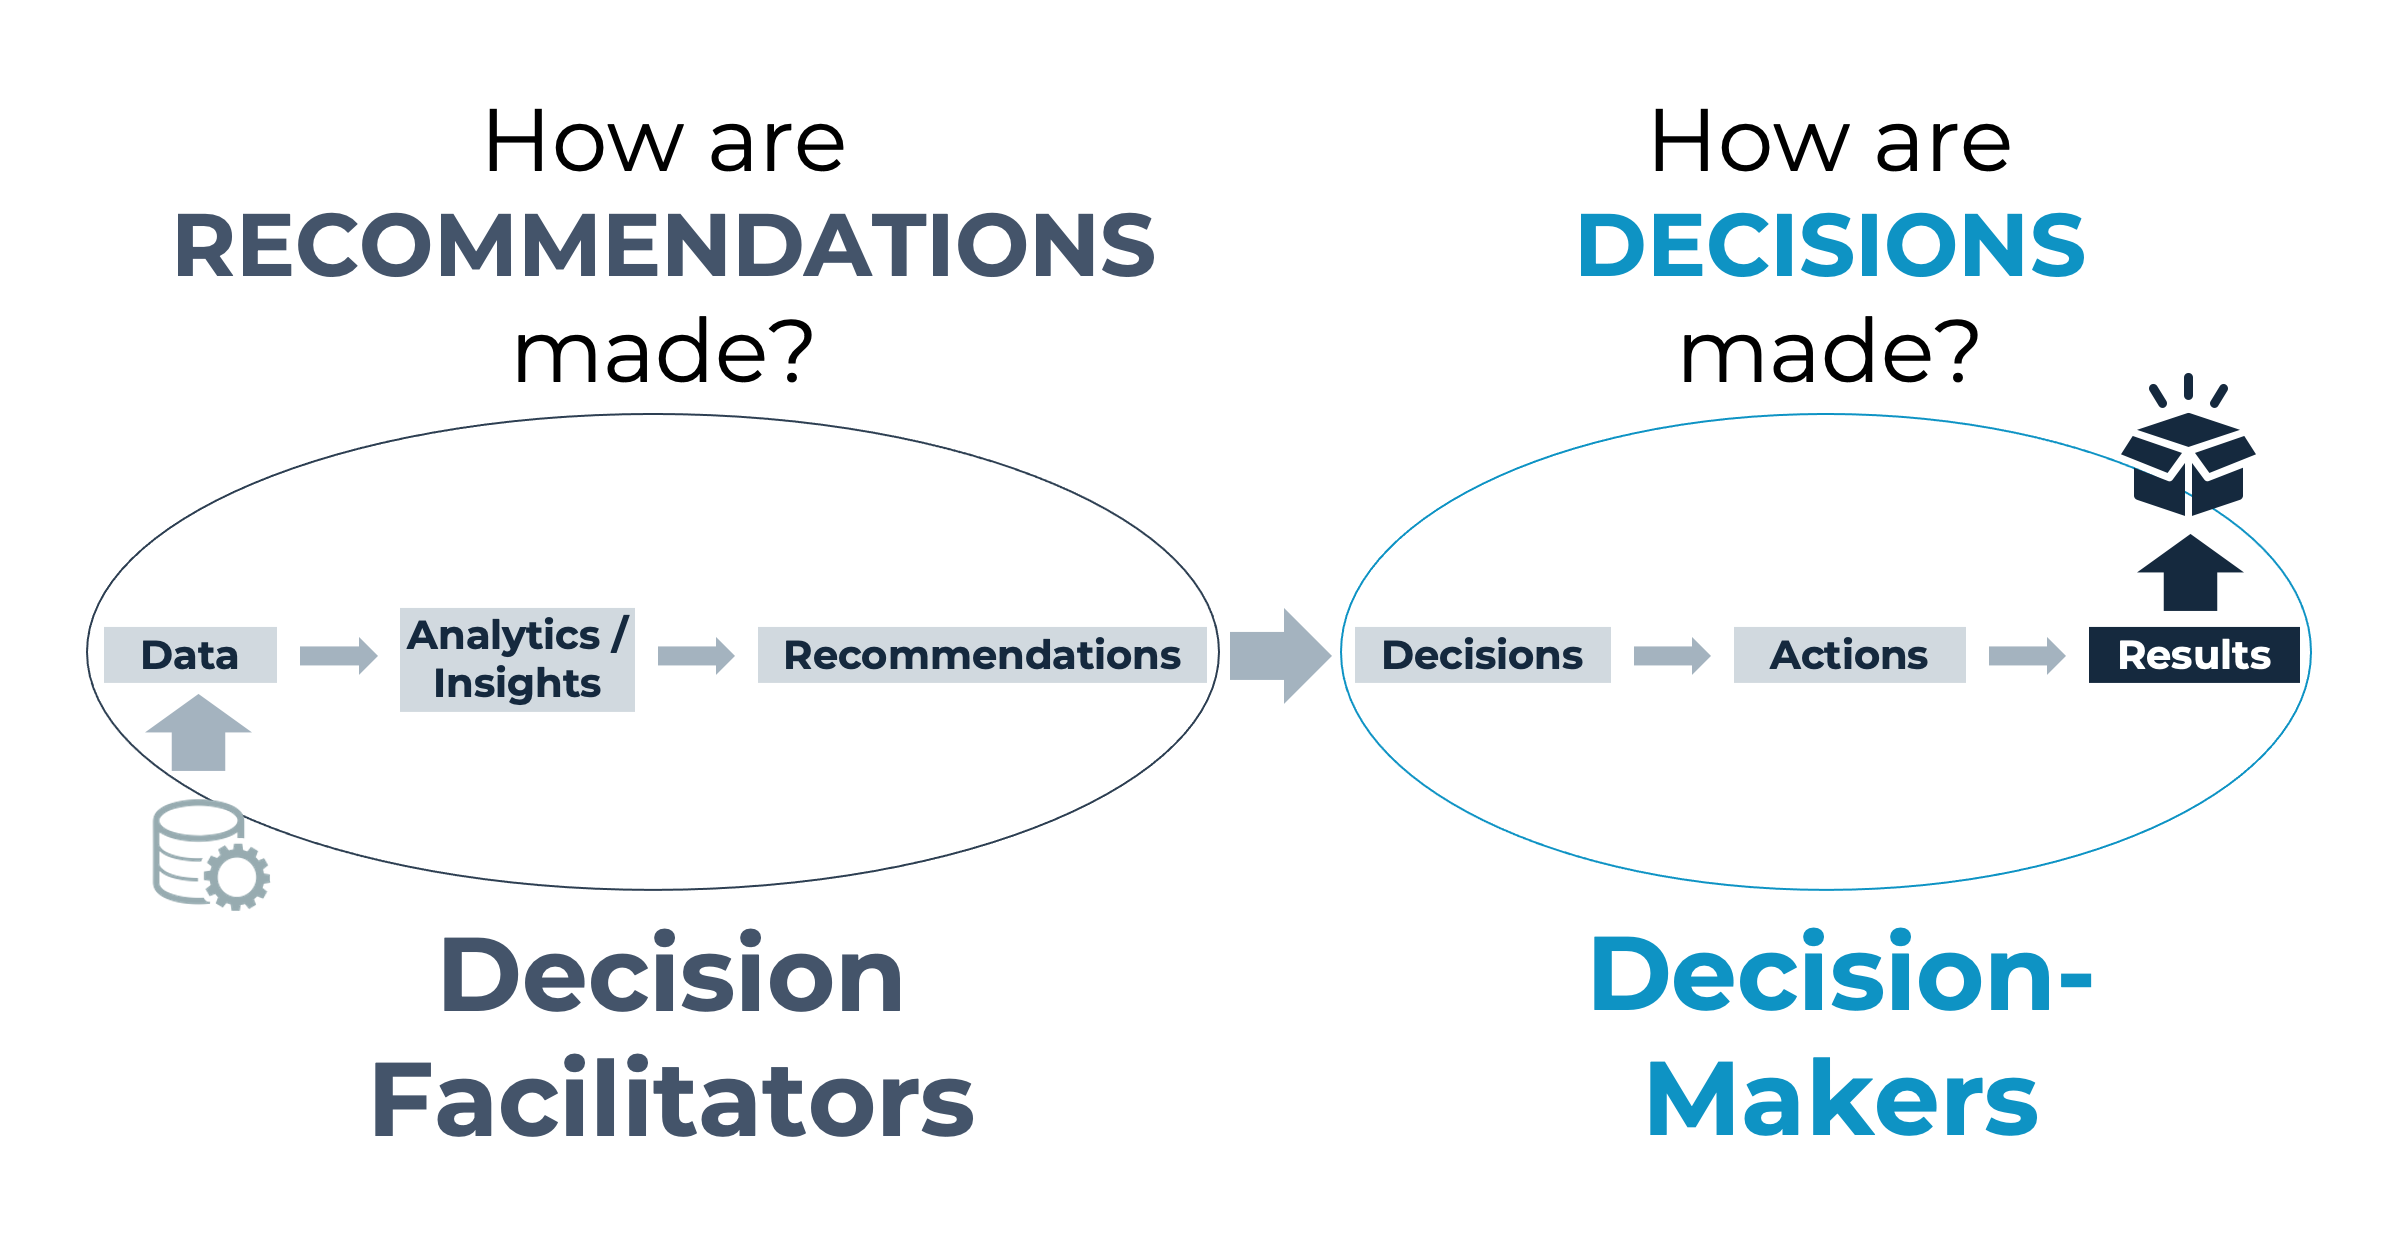 How recommendations are made vs. how decisions are made.